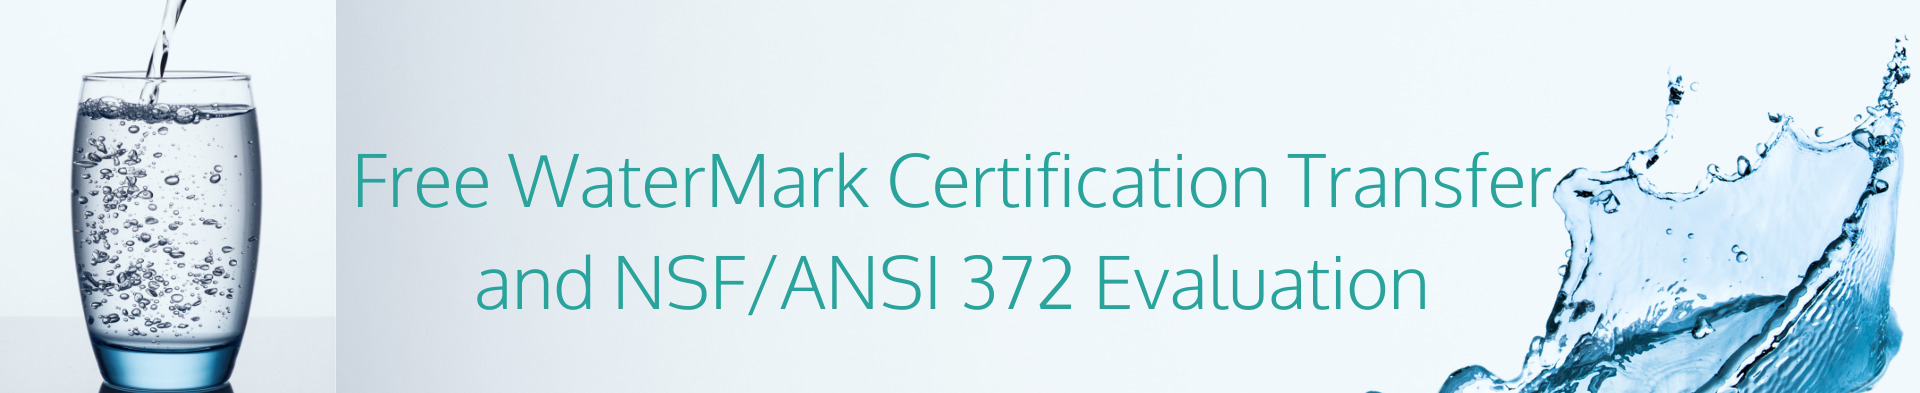 Free WaterMark Certifiction Transfer And NSFANSI 372 Evaluation